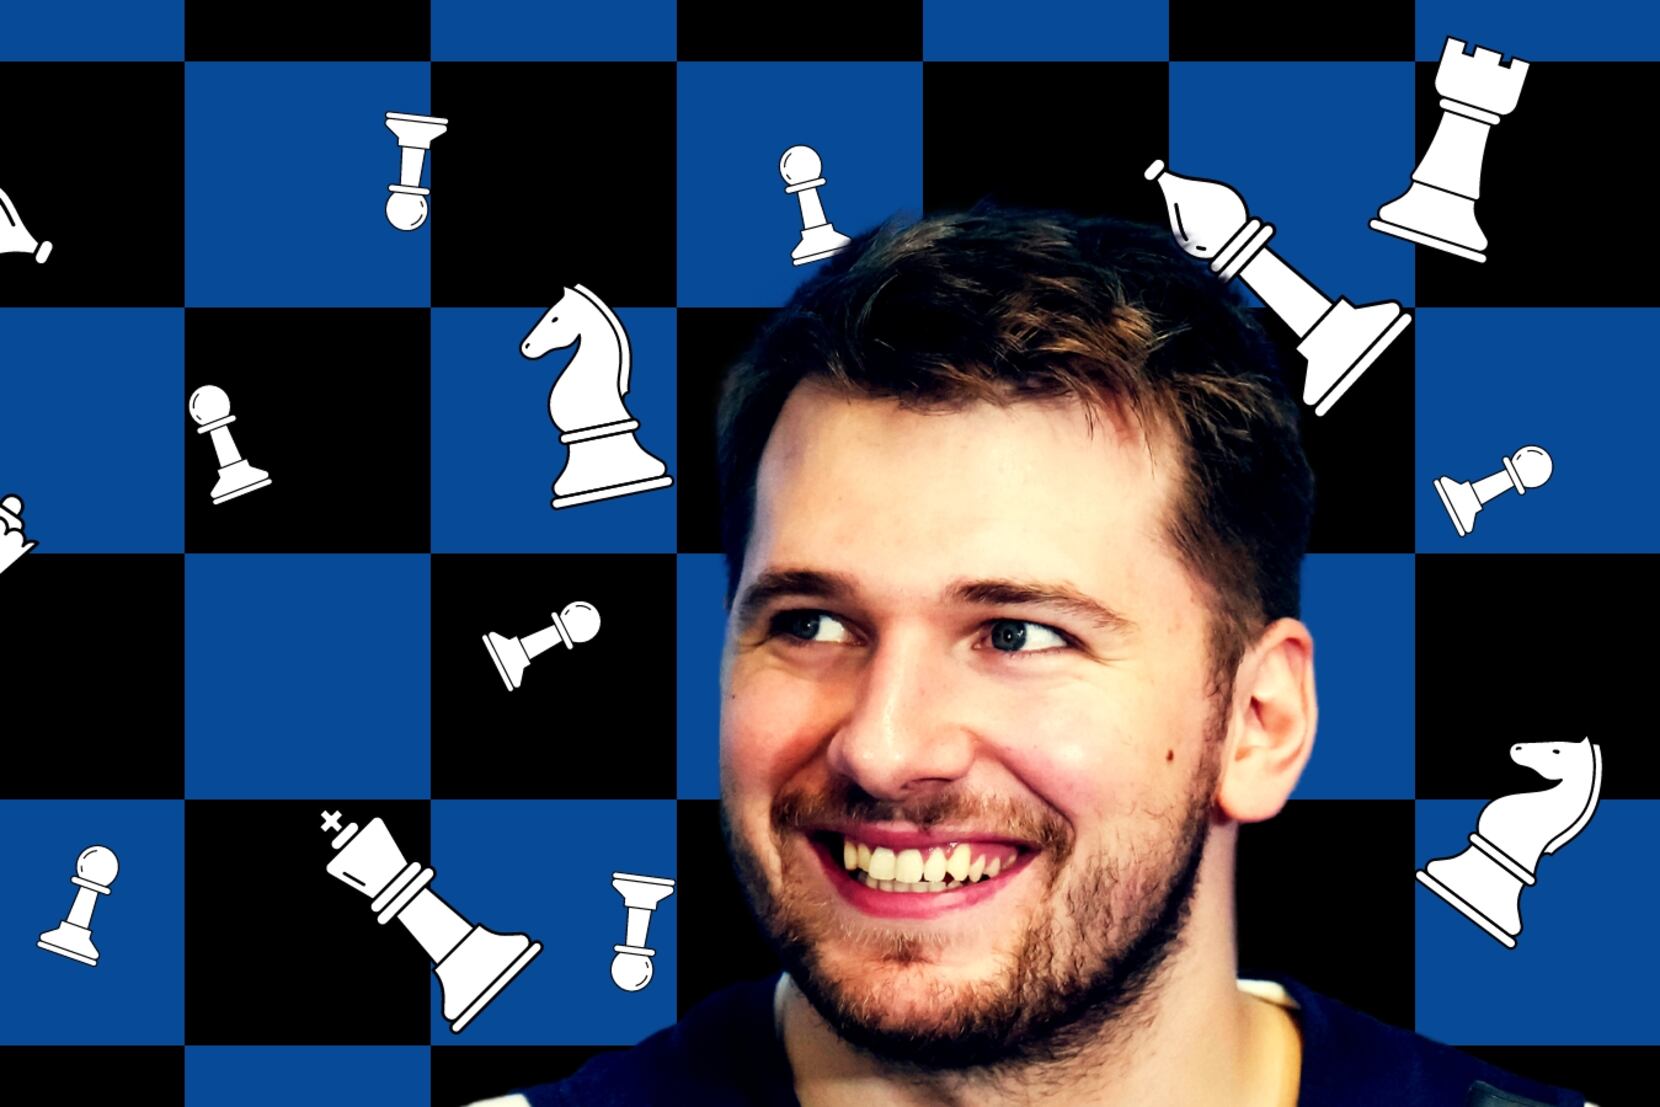 Play Chess Online in Realtime. Meet People Across the Globe